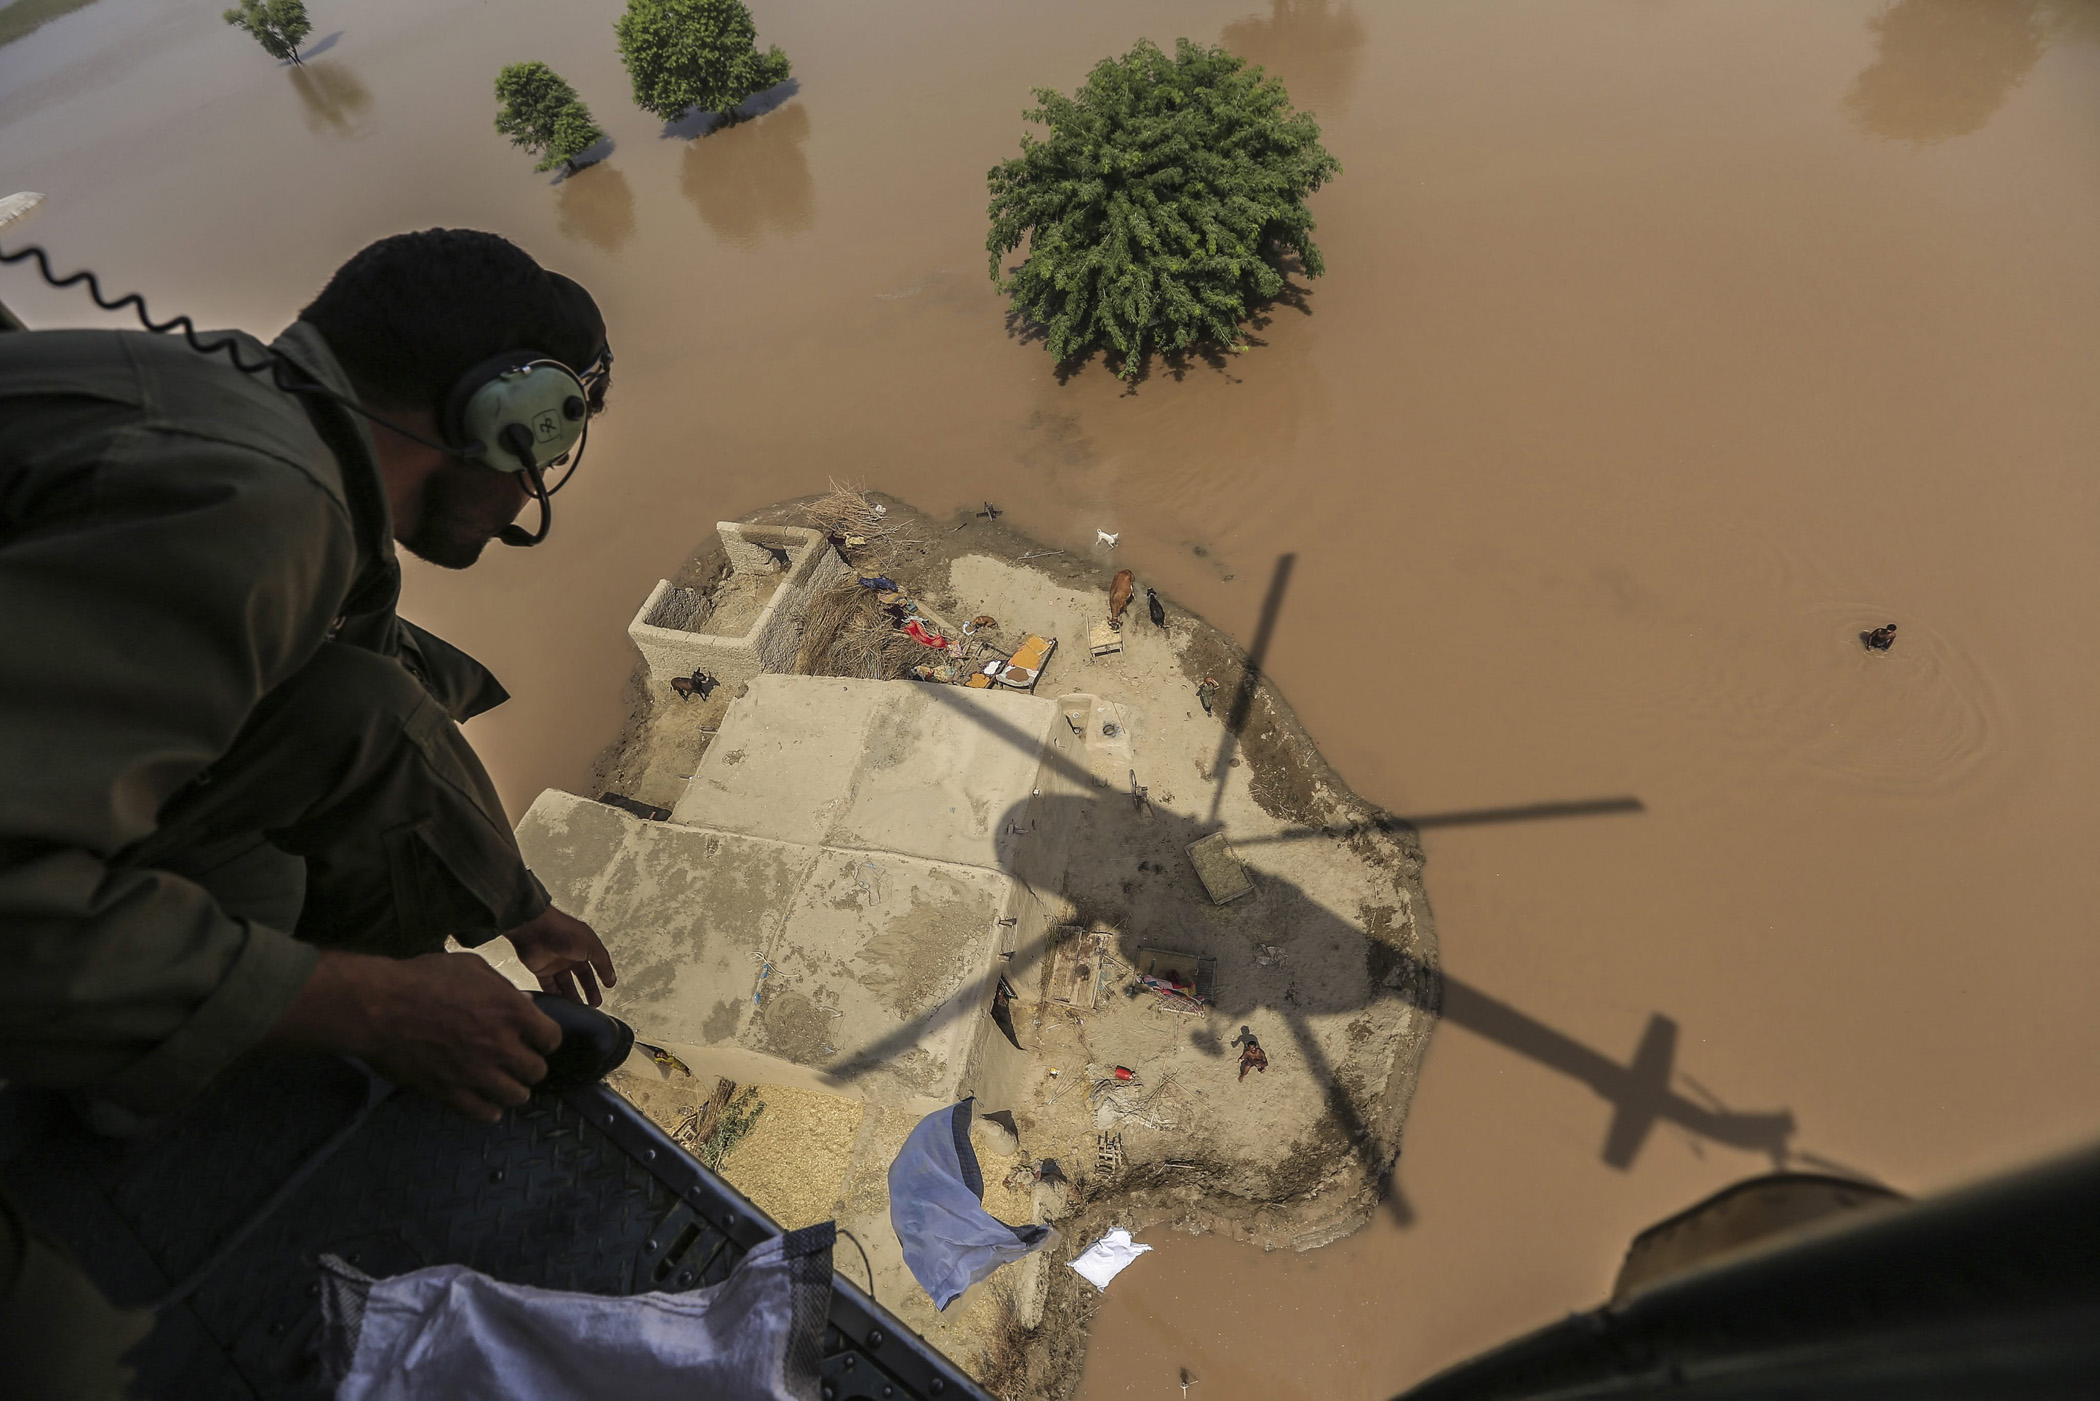 A Pakistani Army soldier distributes food bags in flooded areas in Shujabad, on the outskirts of Multan, Pakistan, Sept. 15, 2014.